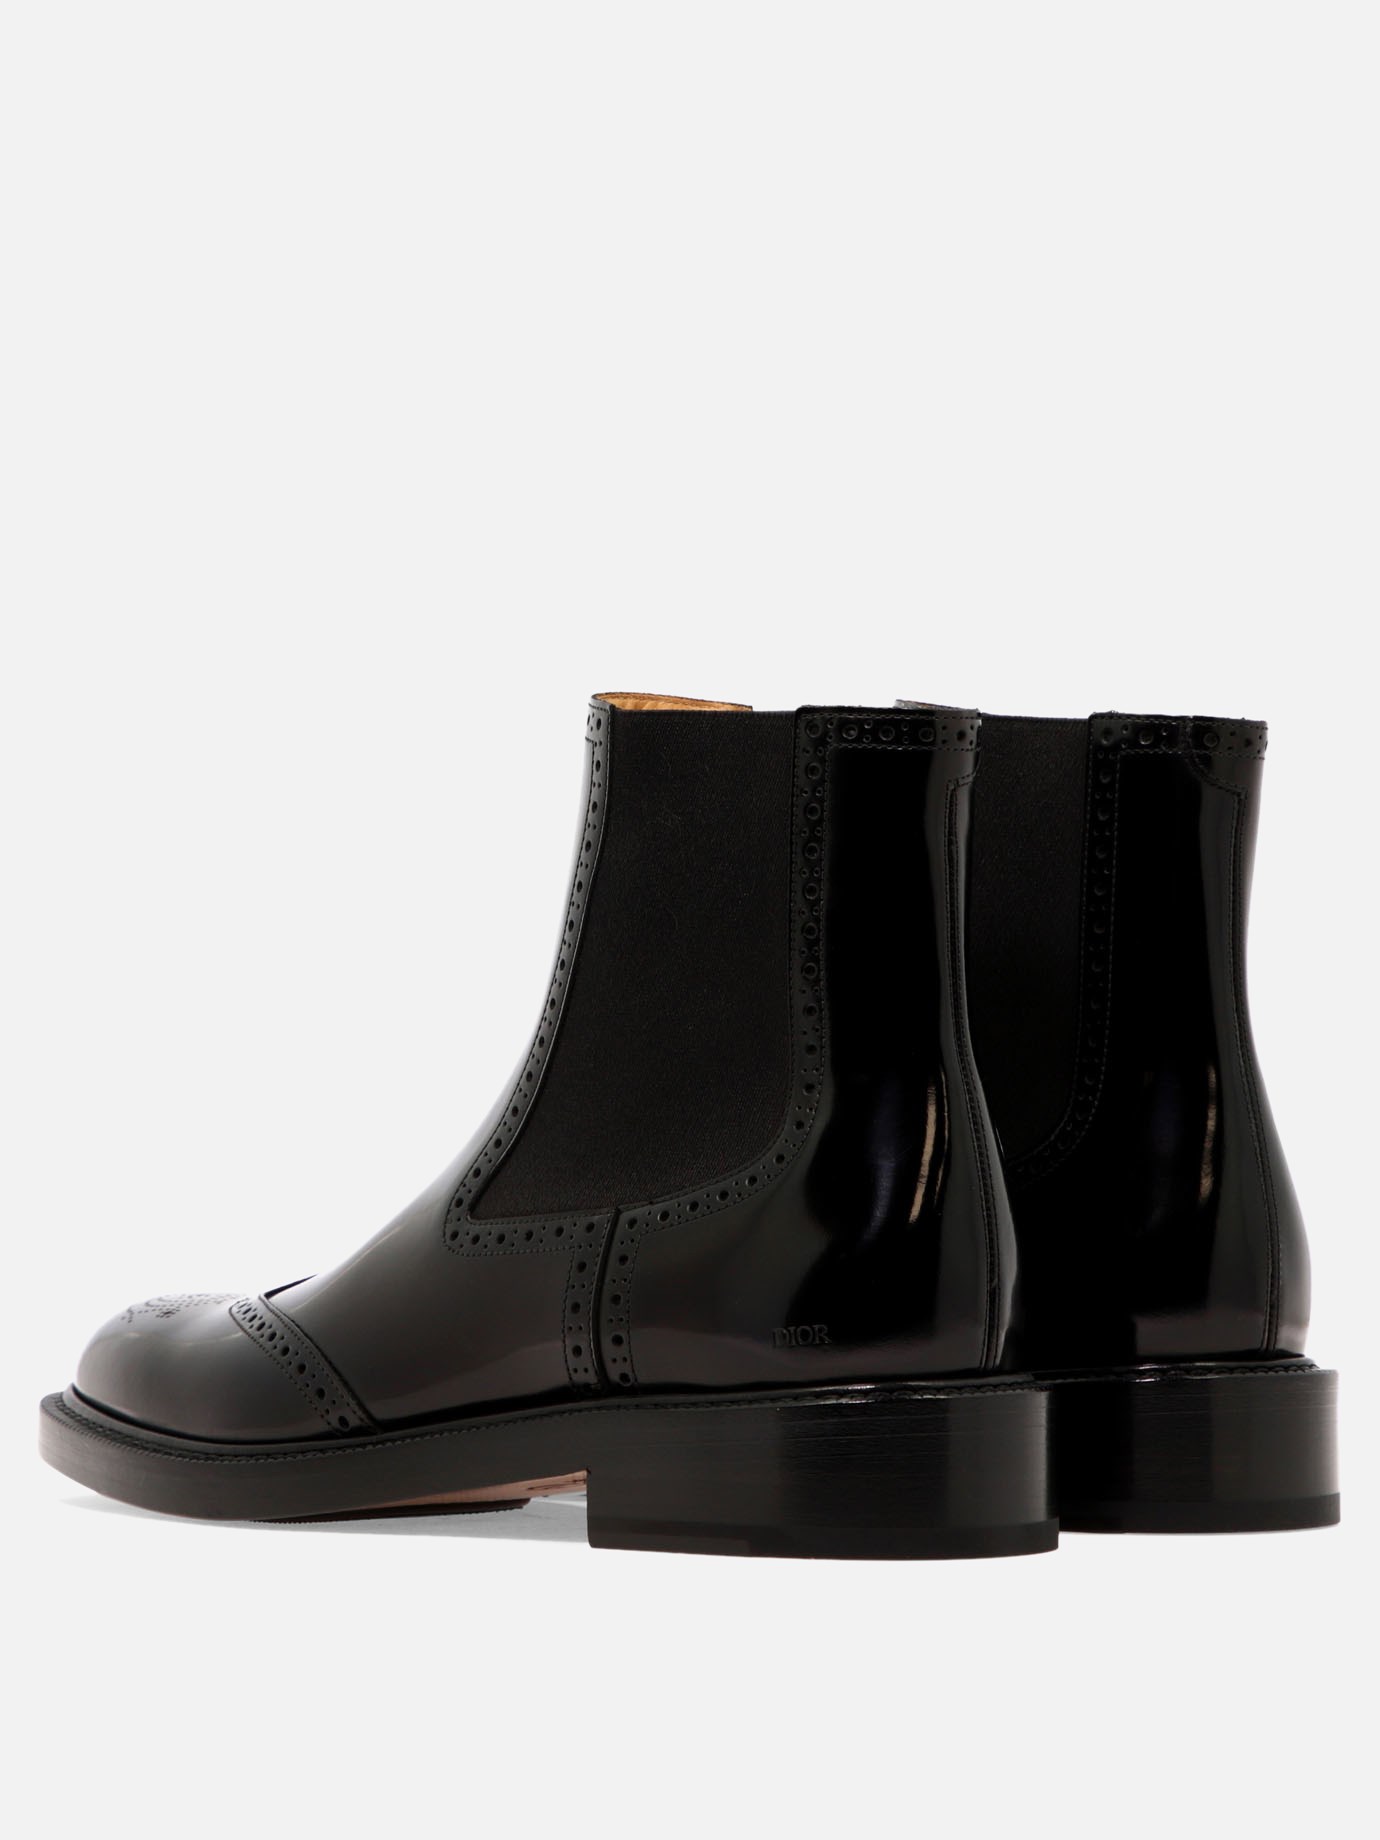  Evidence  Chelsea boots by Dior